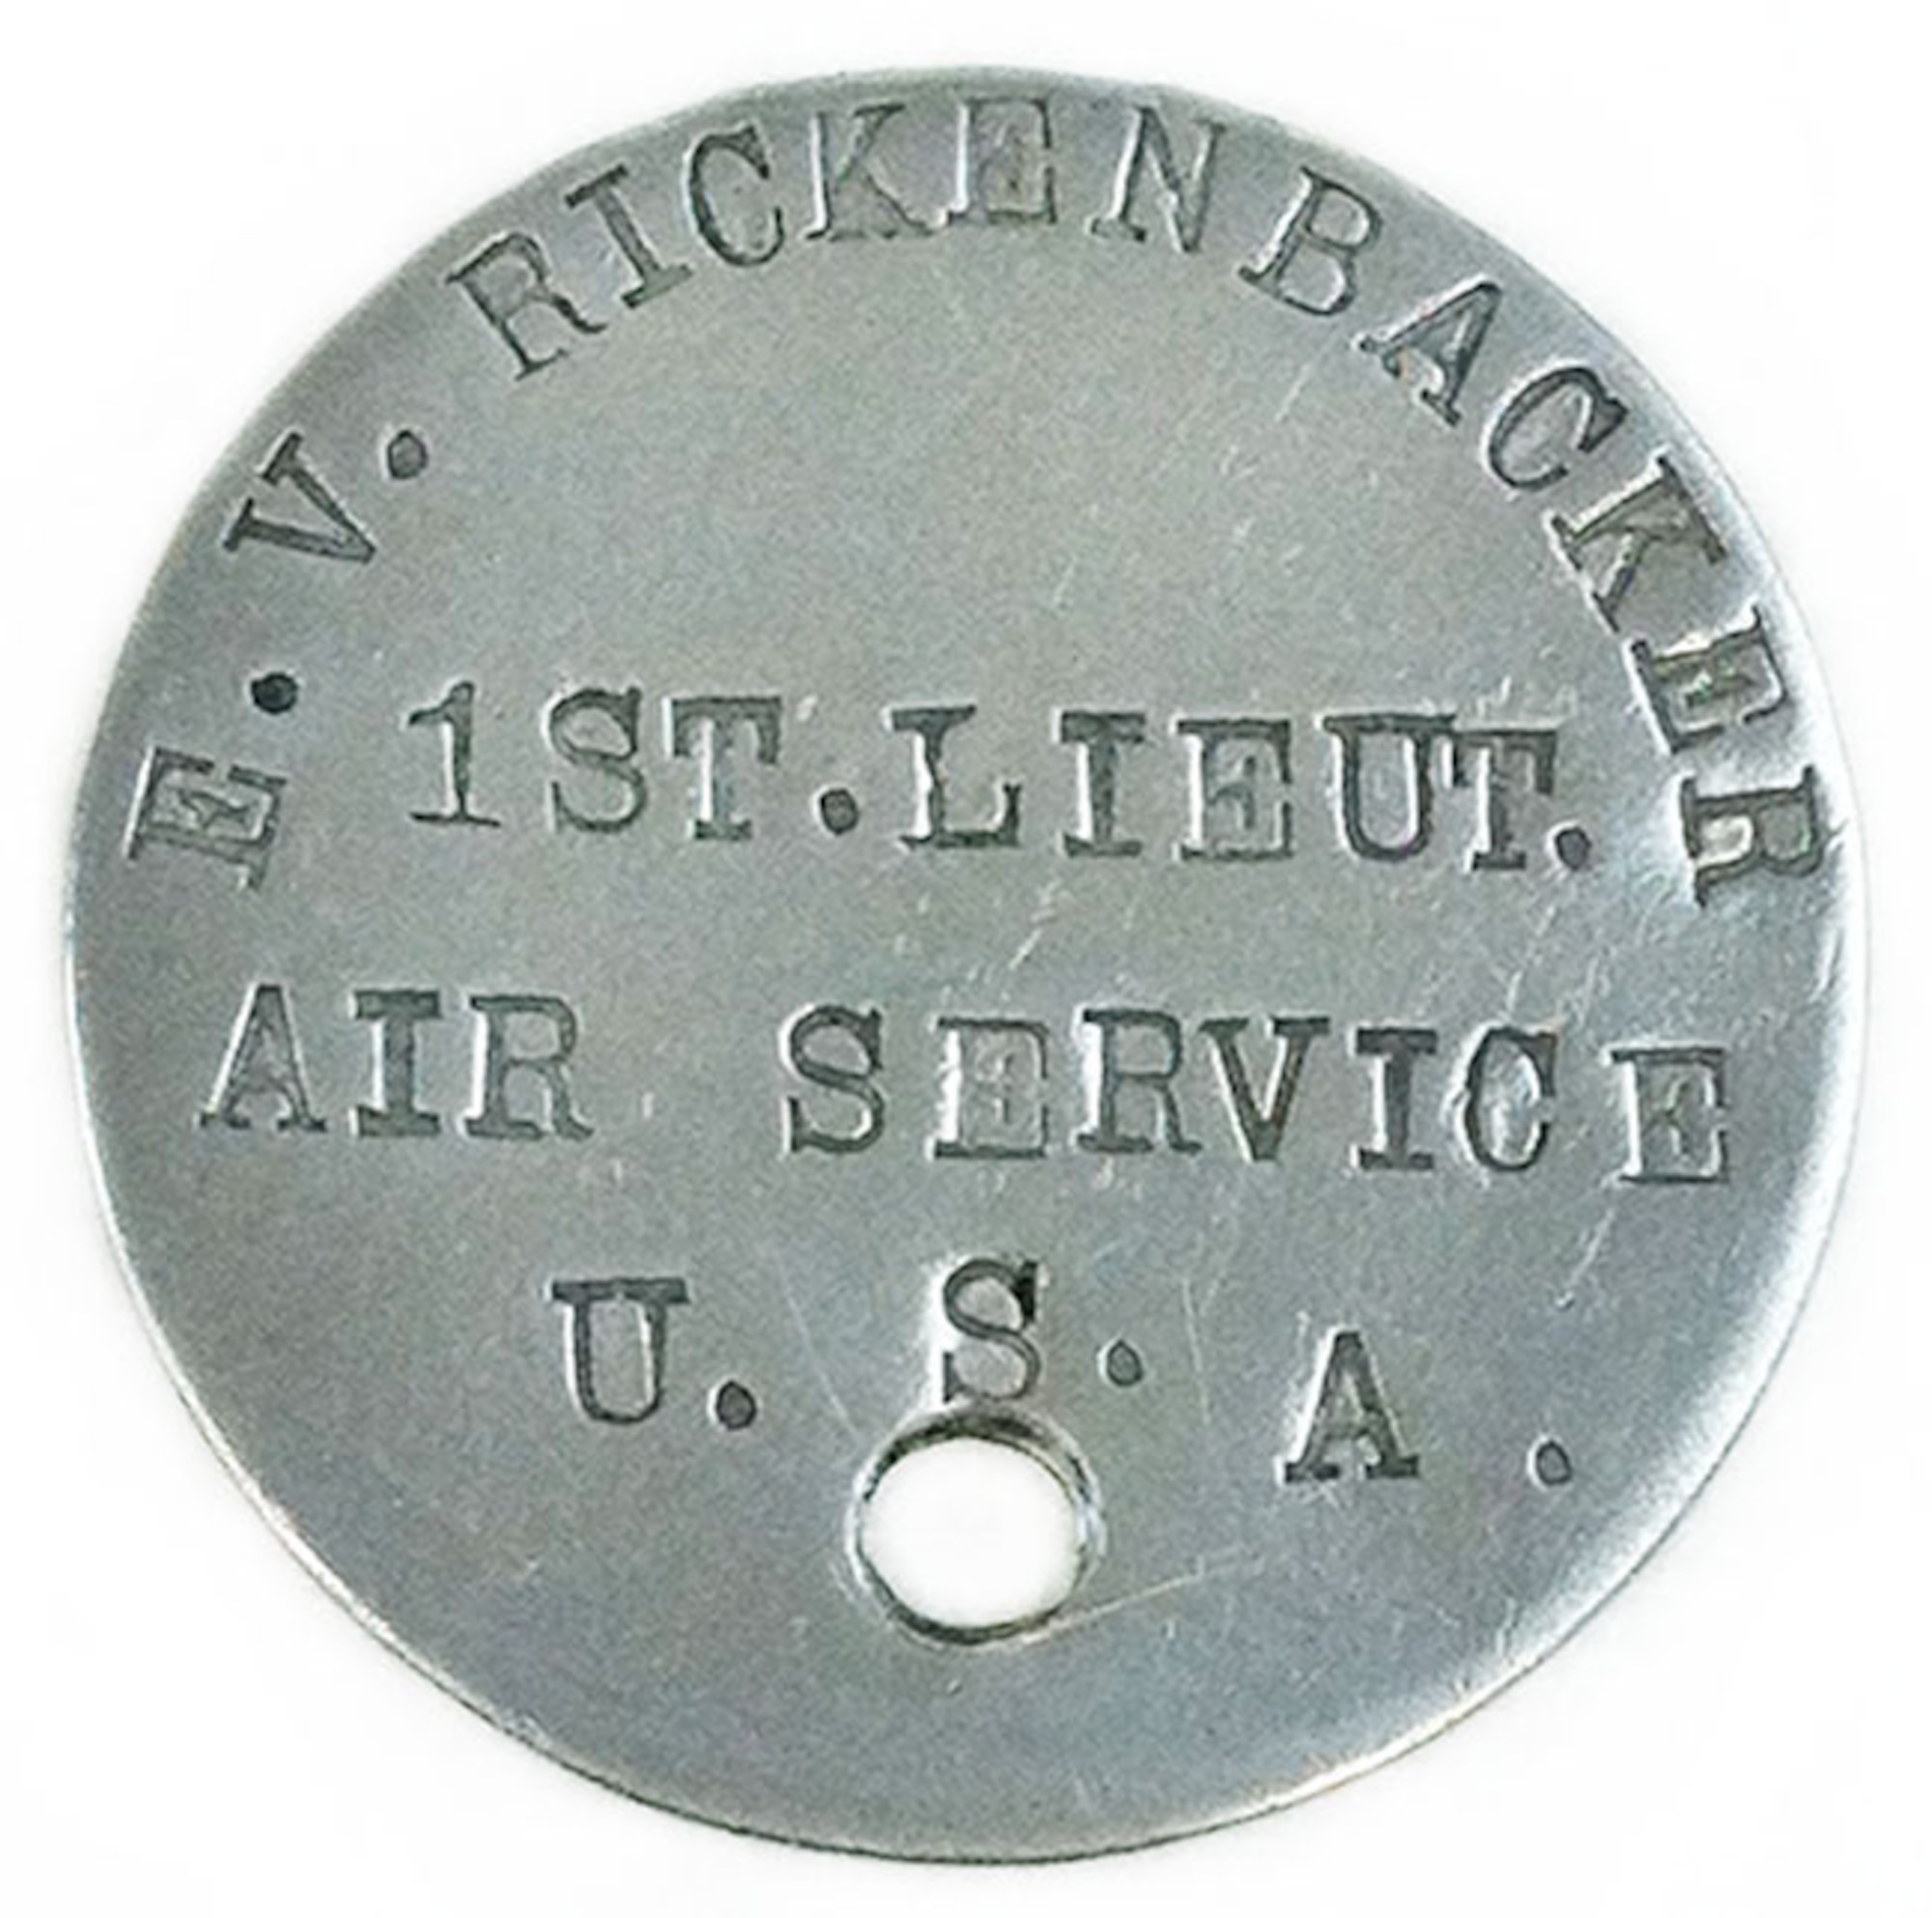 Commander of the "Hat-in-Ring" 94th Aero Squadron, Capt. Edward V. Rickenbacker was a World War I American fighter ace. He had the most aerial victories of all American fighter pilots during the war with 26. His dog tag shown here was issued to him as a First Lieutenant. It reads: E.V. RICKENBACKER, 1ST. LIEUT., AIR SERVICE, U.S.A. (U.S. Air Force photo)